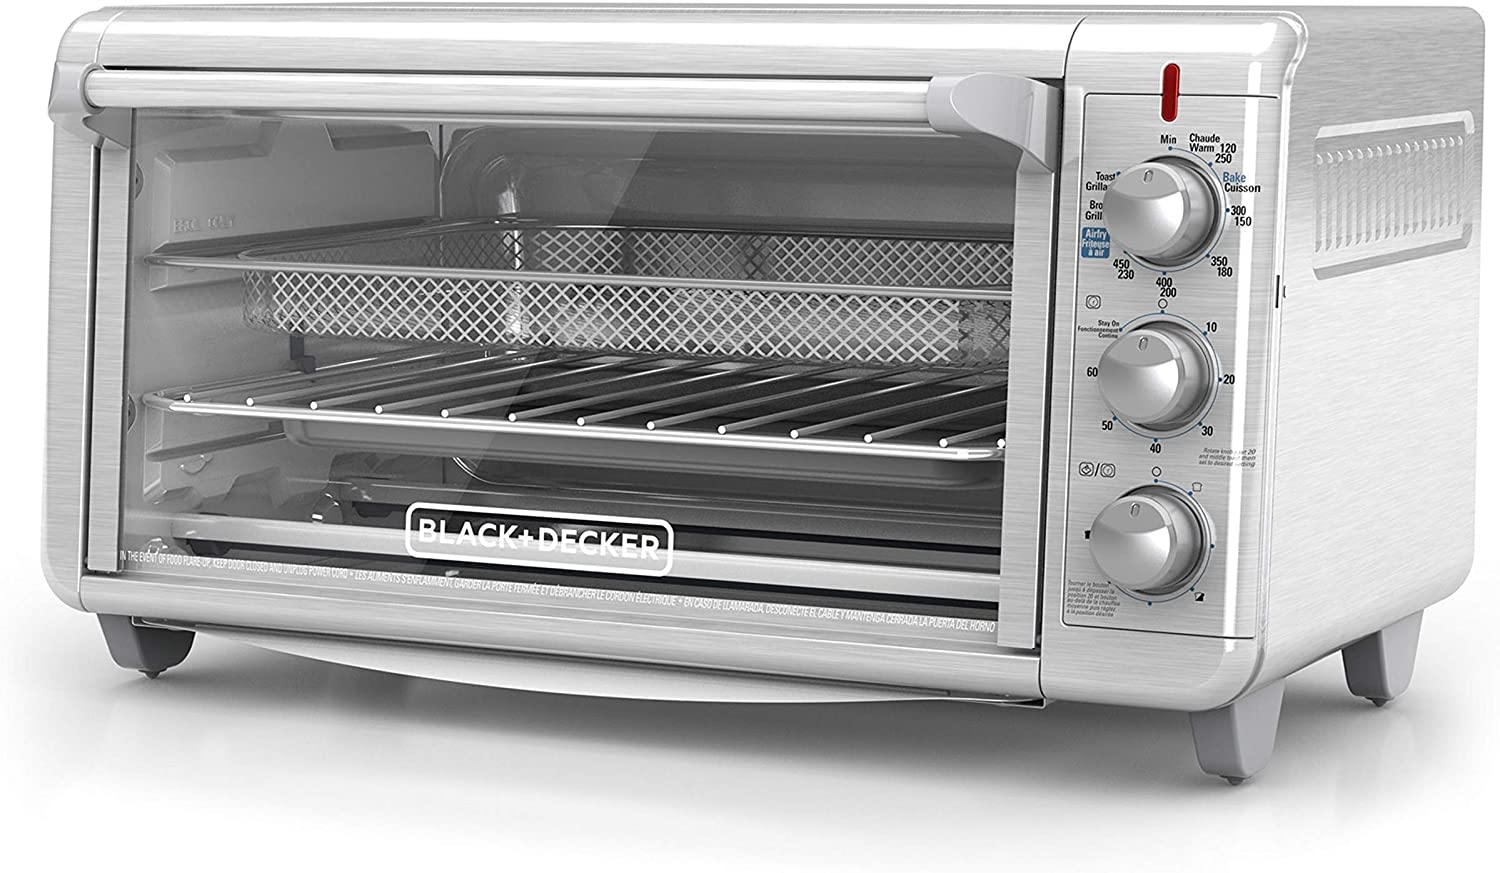 Black+Decker TO3265XSSD Extra Wide Crisp ‘N Bake Air Fry Toaster Oven, Silver, Fits 9″ x 13″ Pan Import To Shop ×Product